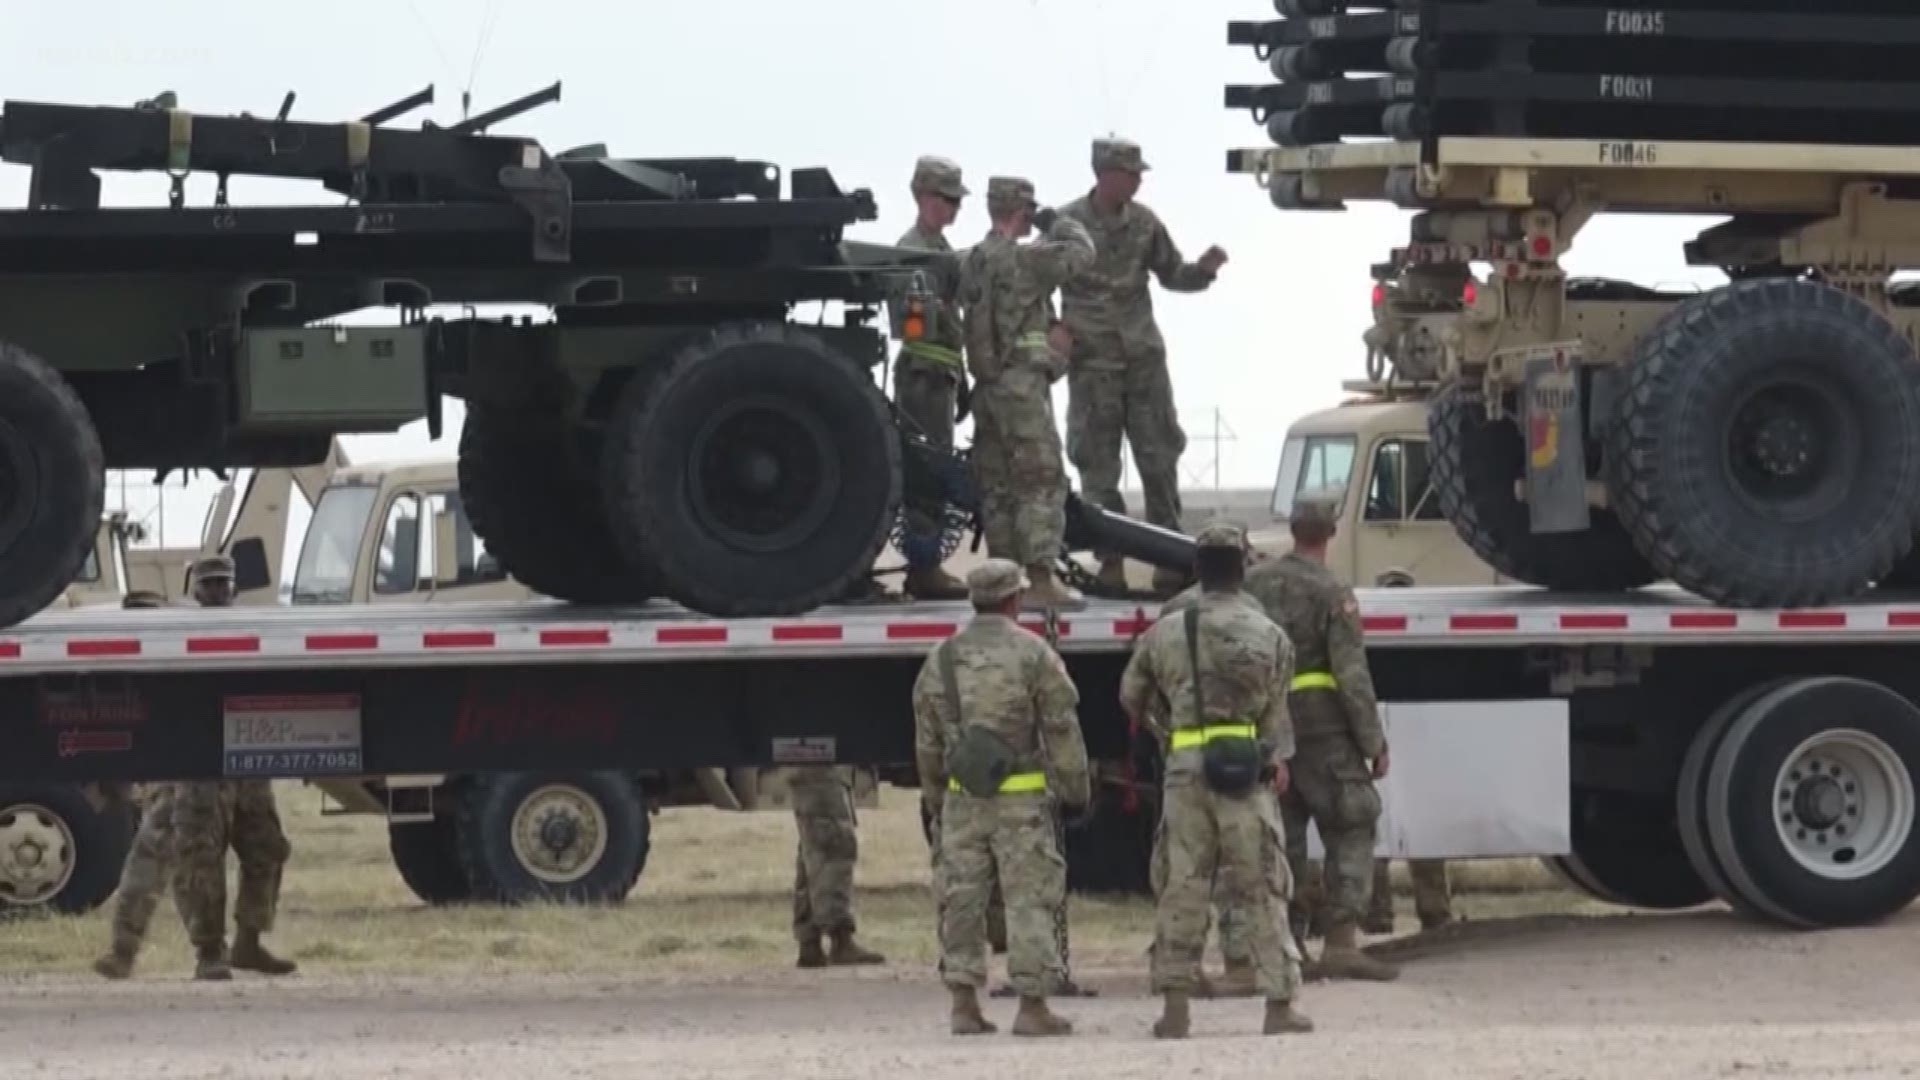 The troops deployed to the border are working right now to prepare for the caravan's arrival. Border Reporter Oscar Margain shares what he saw first-hand at the base near the southern tip of Texas.